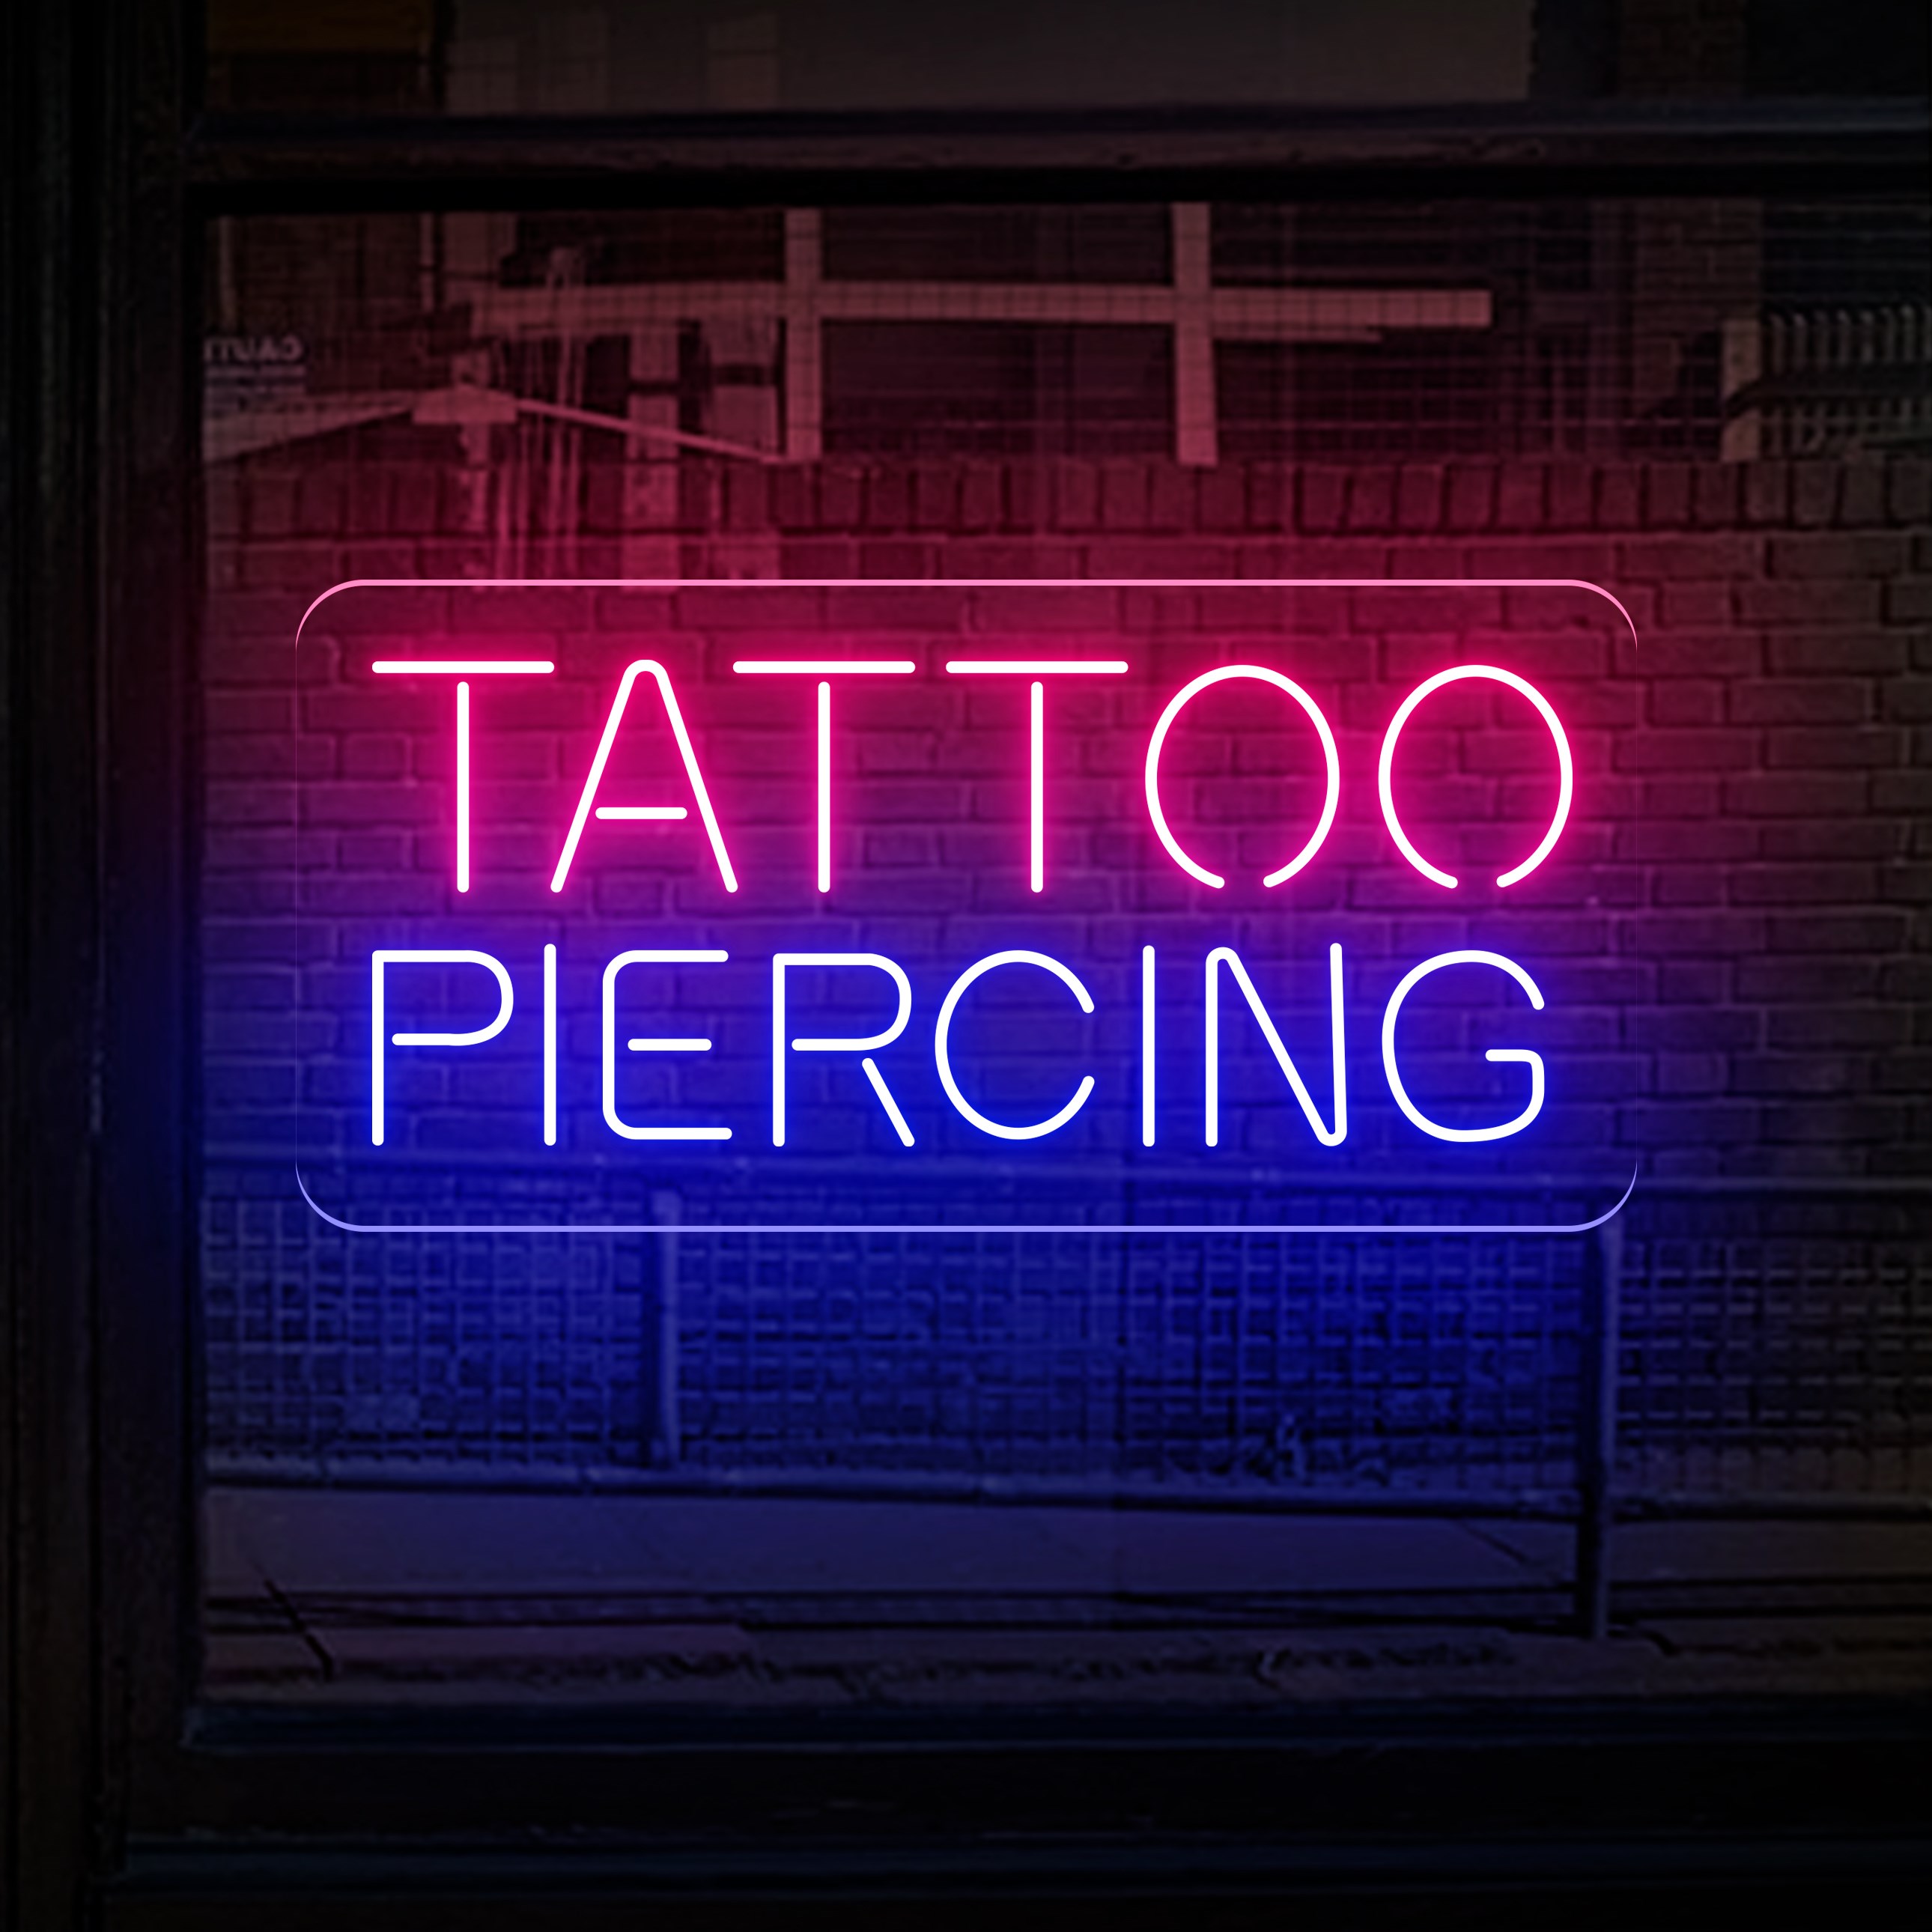 Picture of "Tattoo Piercing" Neon Sign